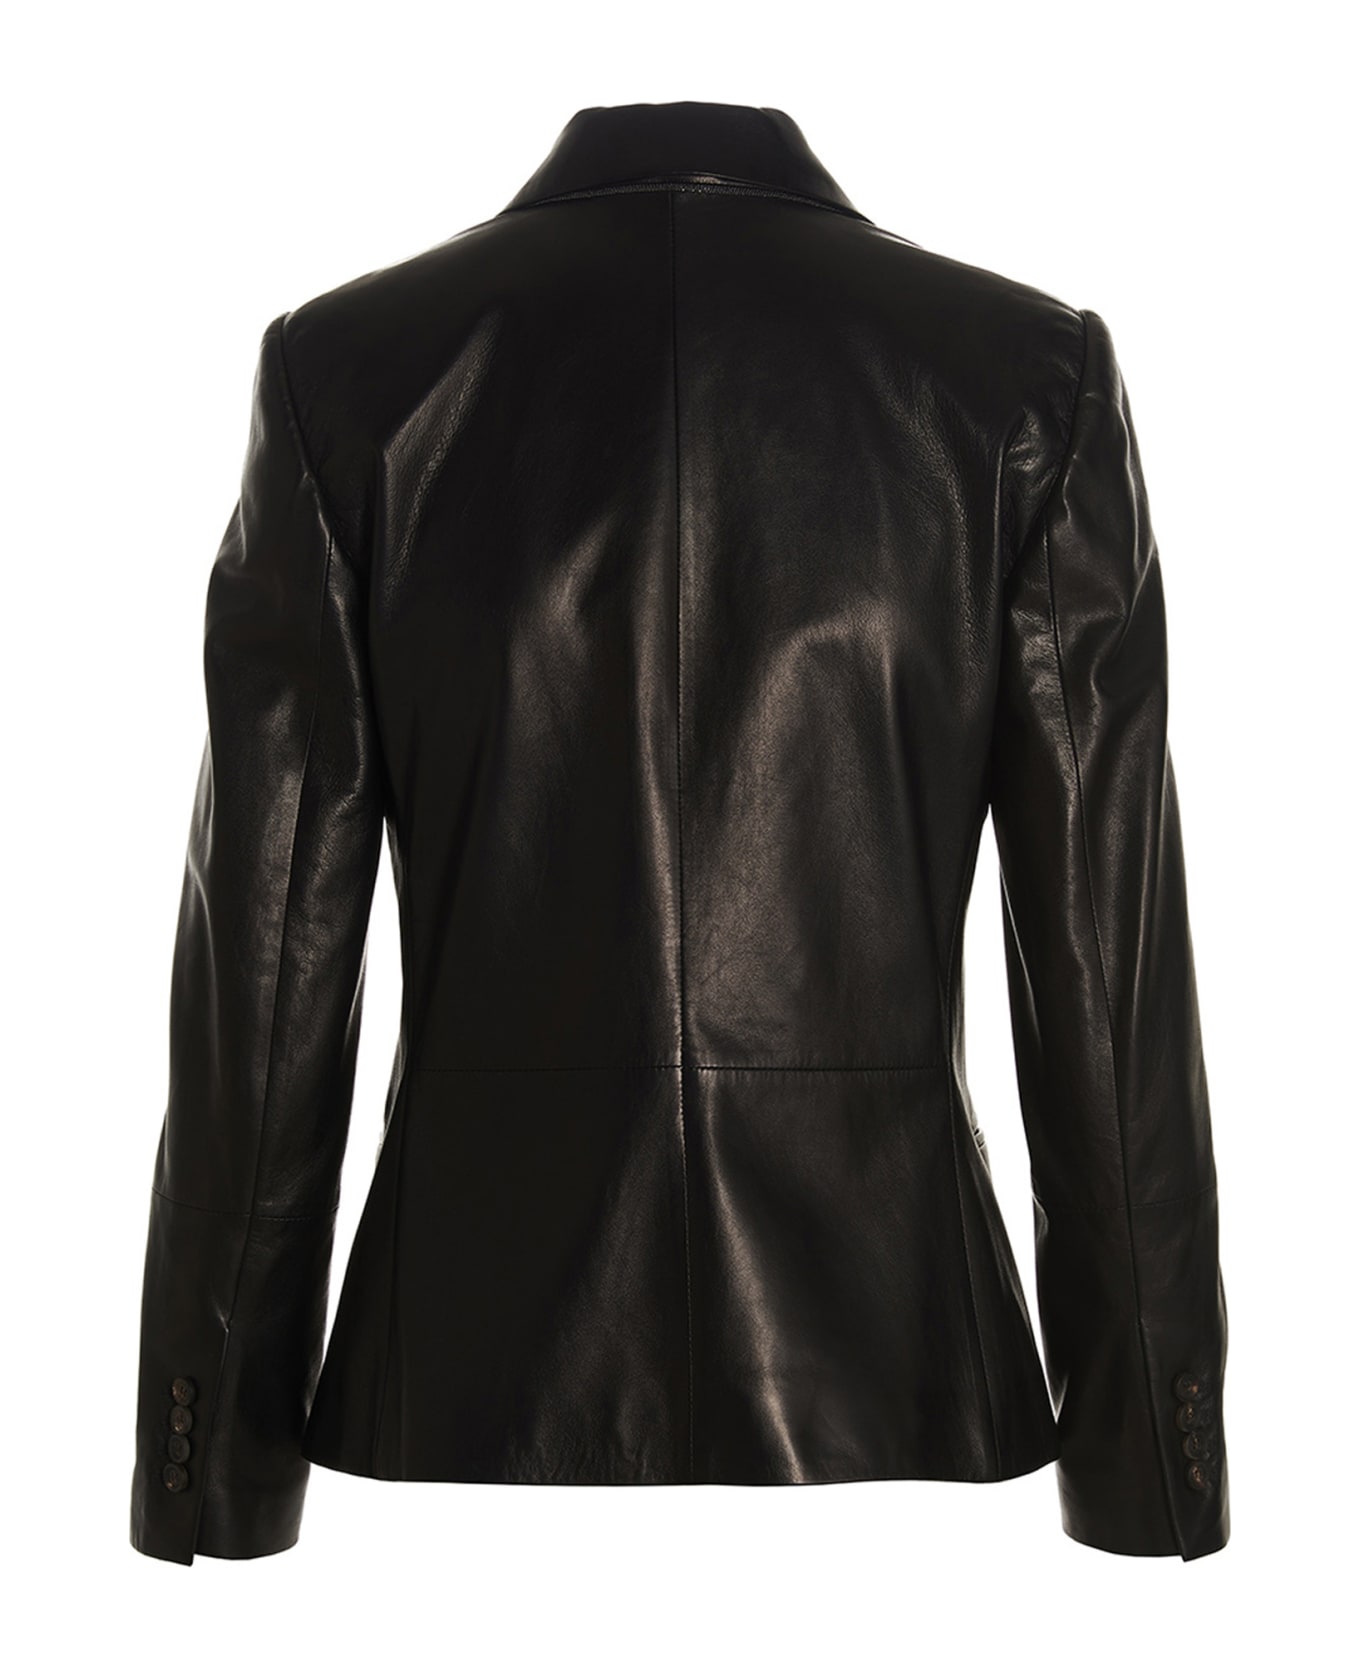 Brunello Cucinelli Double-breasted Leather Jacket - Black